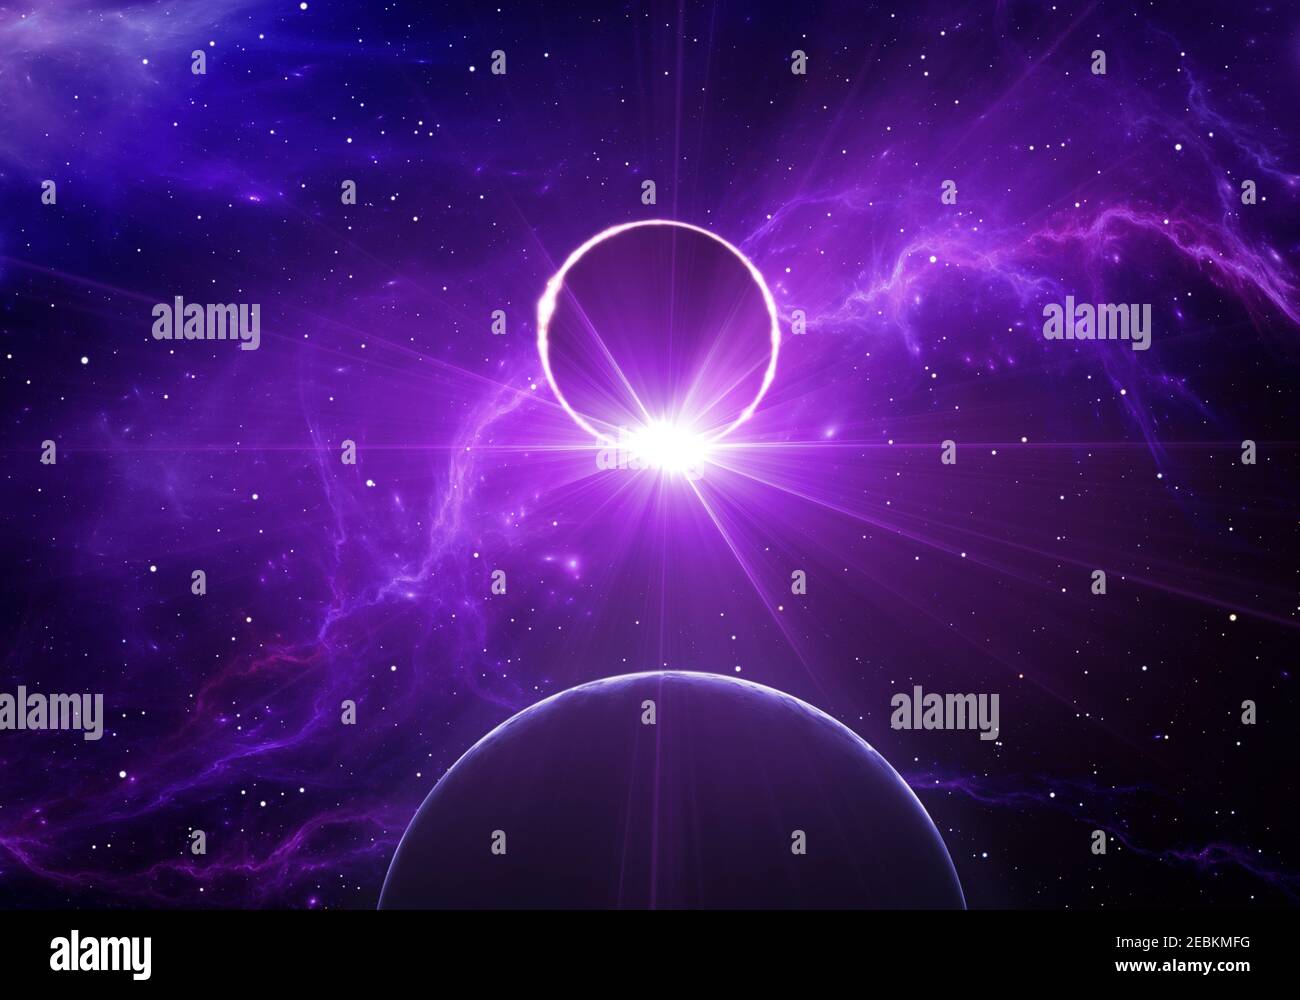 Exoplanet passes in front of its host star in deep space. Star eclipse. For use with projects on science, research, and education. 3D illustration Stock Photo